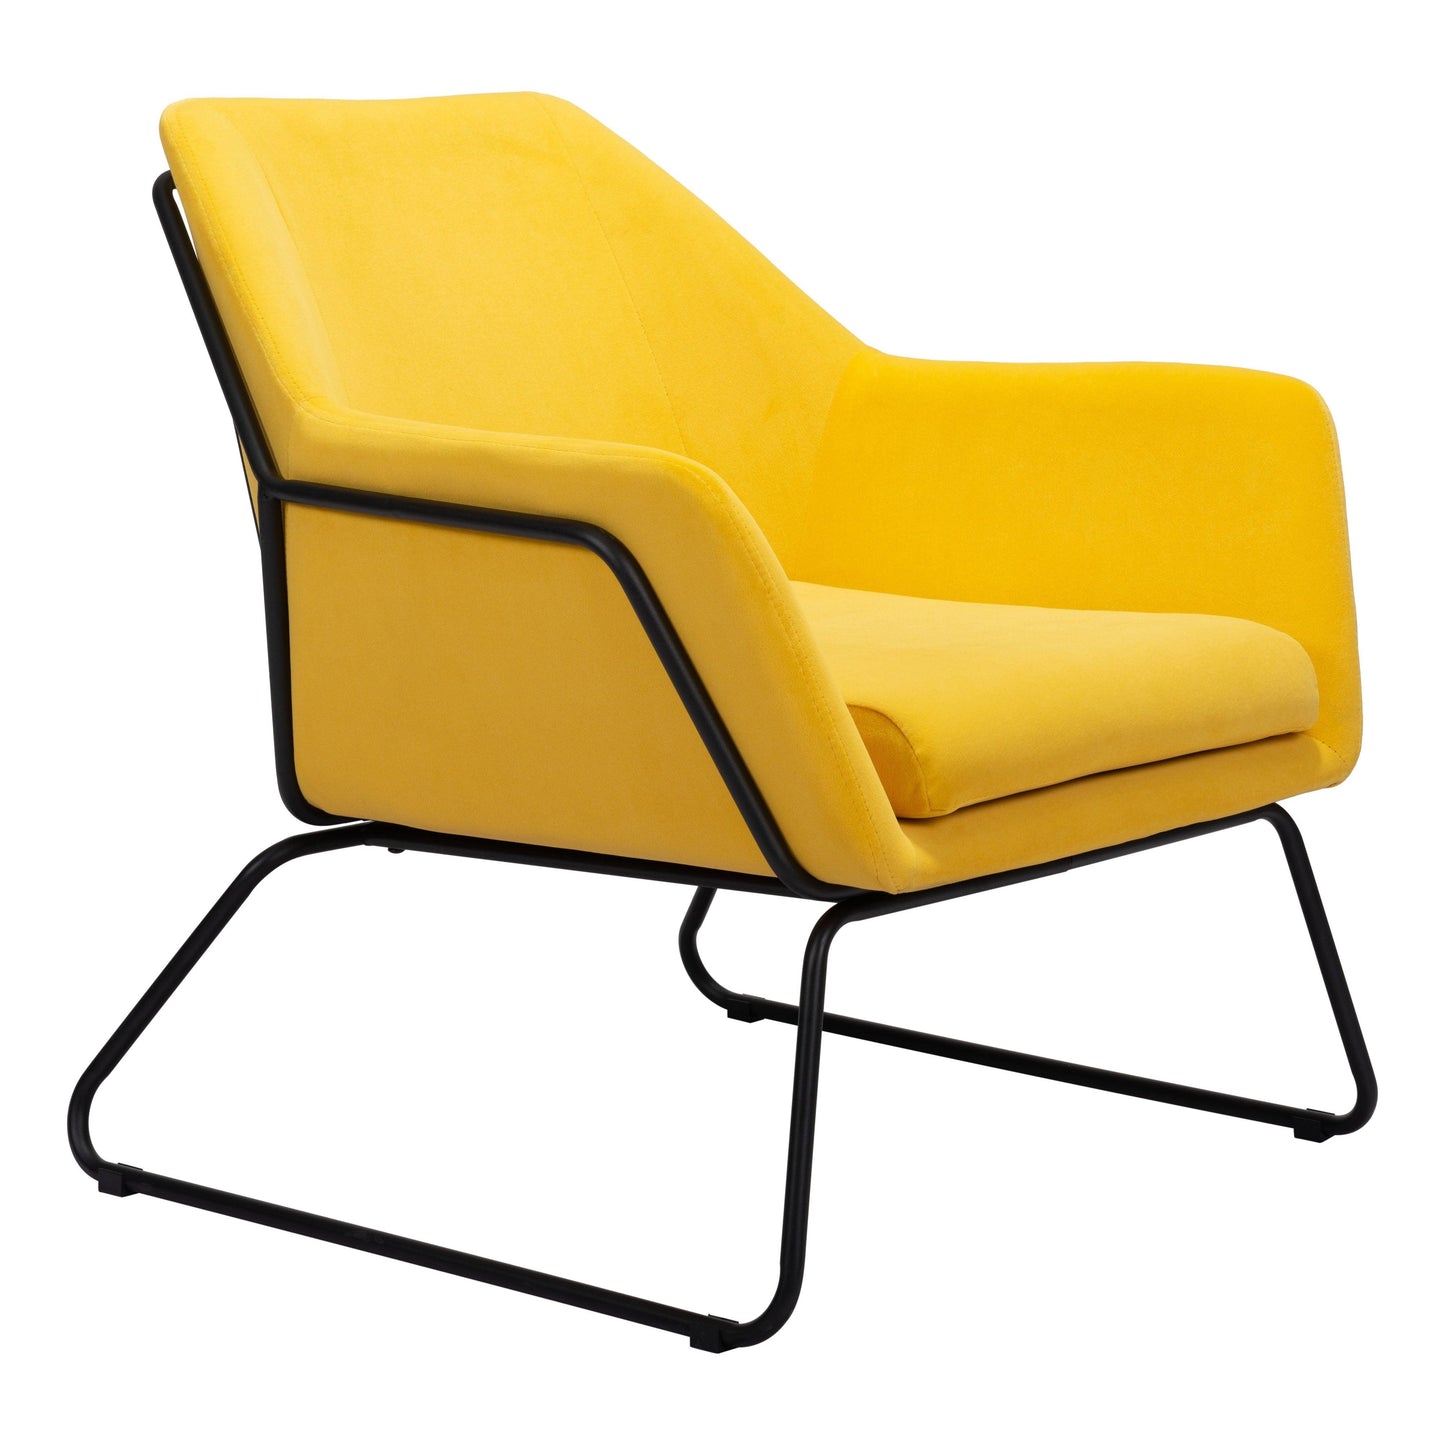 Jose Accent Chair Yellow - Sideboards and Things Brand_Zuo Modern, Color_Black, Color_Yellow, Features_Removable Cushions, Finish_Powder Coated, Materials_Metal, Materials_Wood, Metal Type_Steel, Product Type_Occasional Chair, Upholstery Type_Fabric Blend, Upholstery Type_Polyester, Wood Species_Plywood